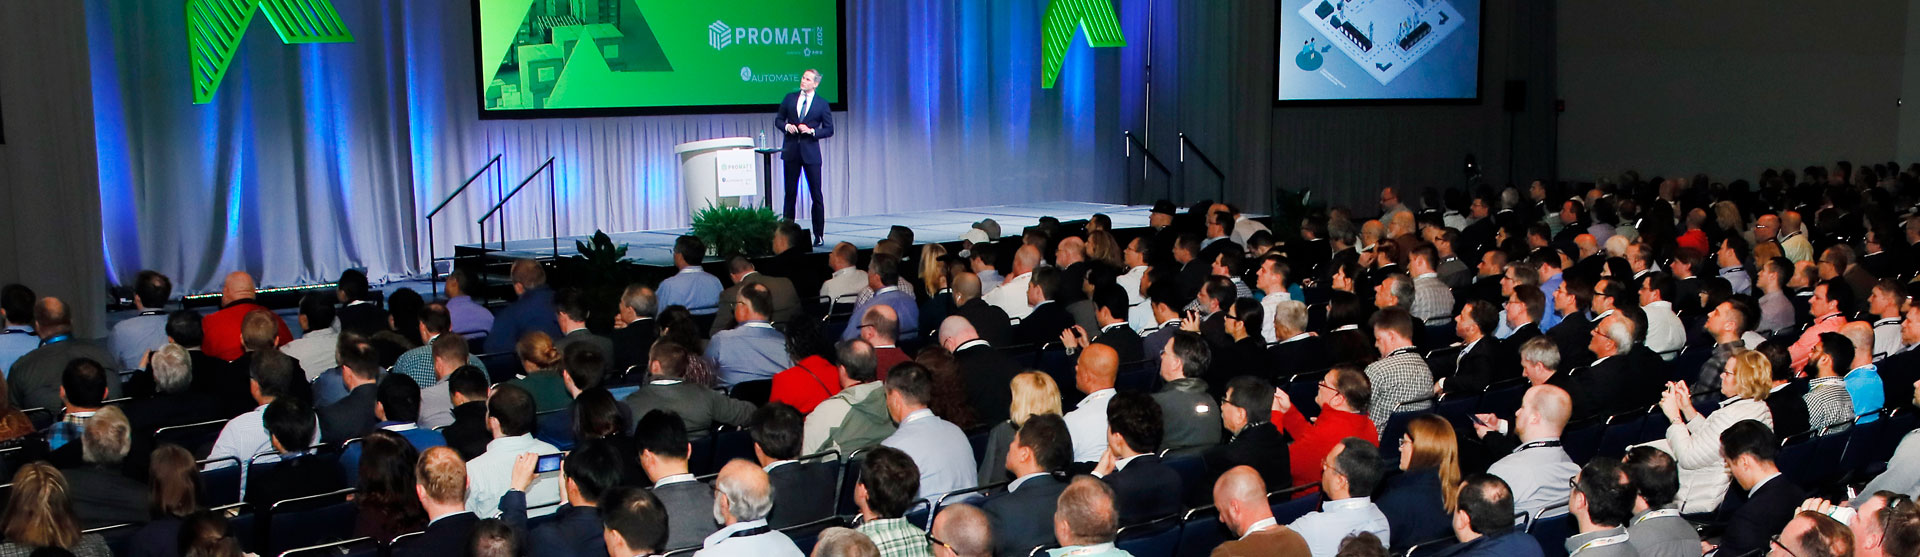 ProMat Attendees Seek an Answer to a Common Question